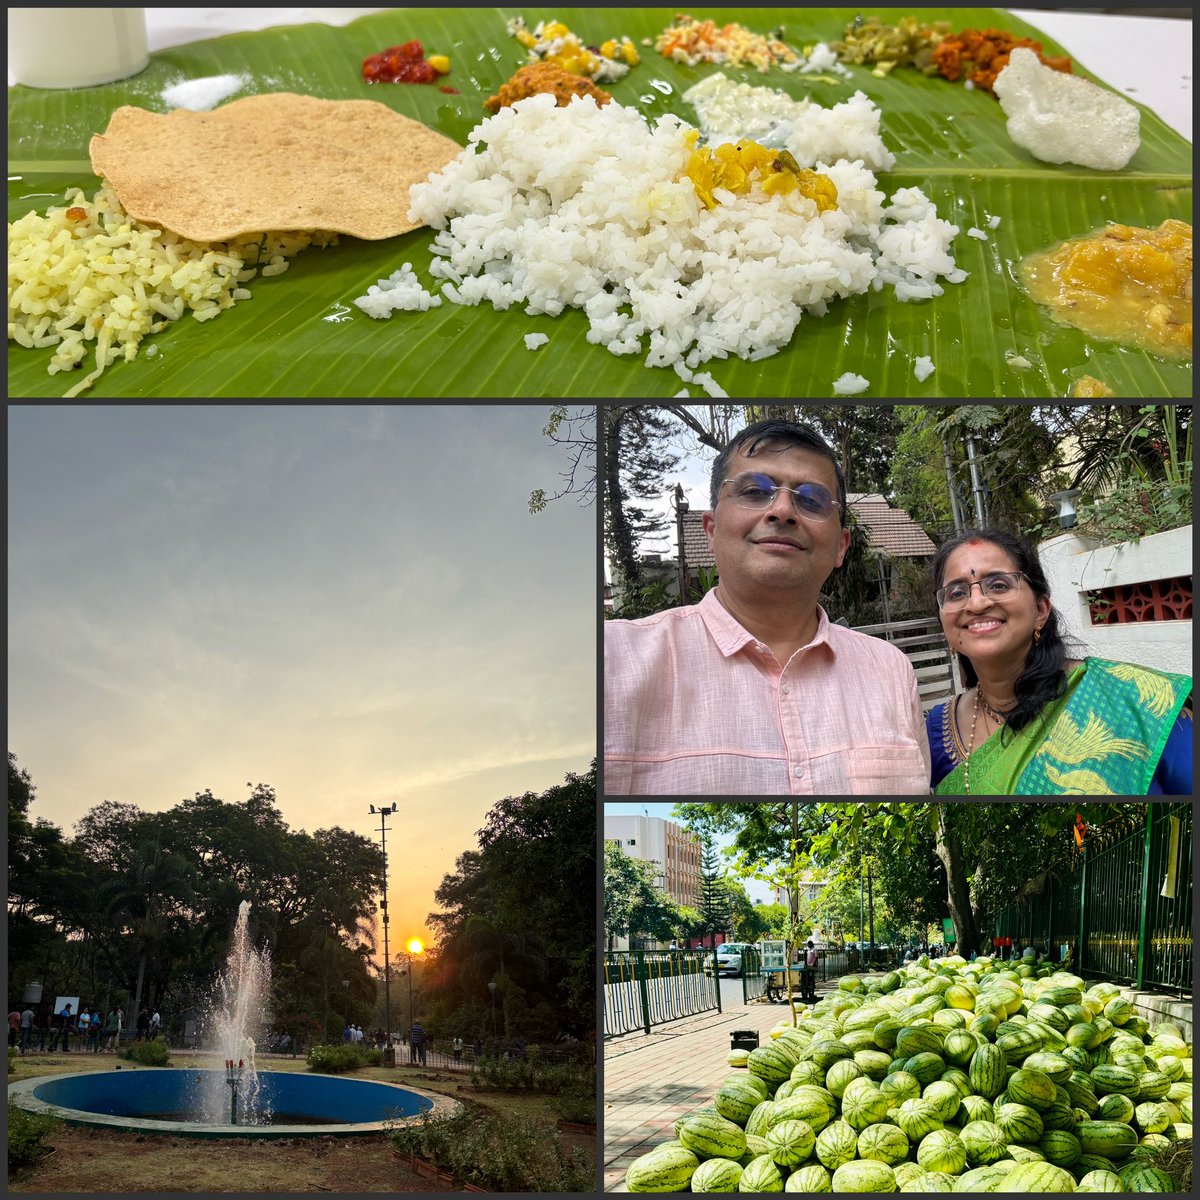 Short stay in Bengaluru, one of my favorite cities. Time spent well - meeting relatives, family events, good food, books, walks and more…